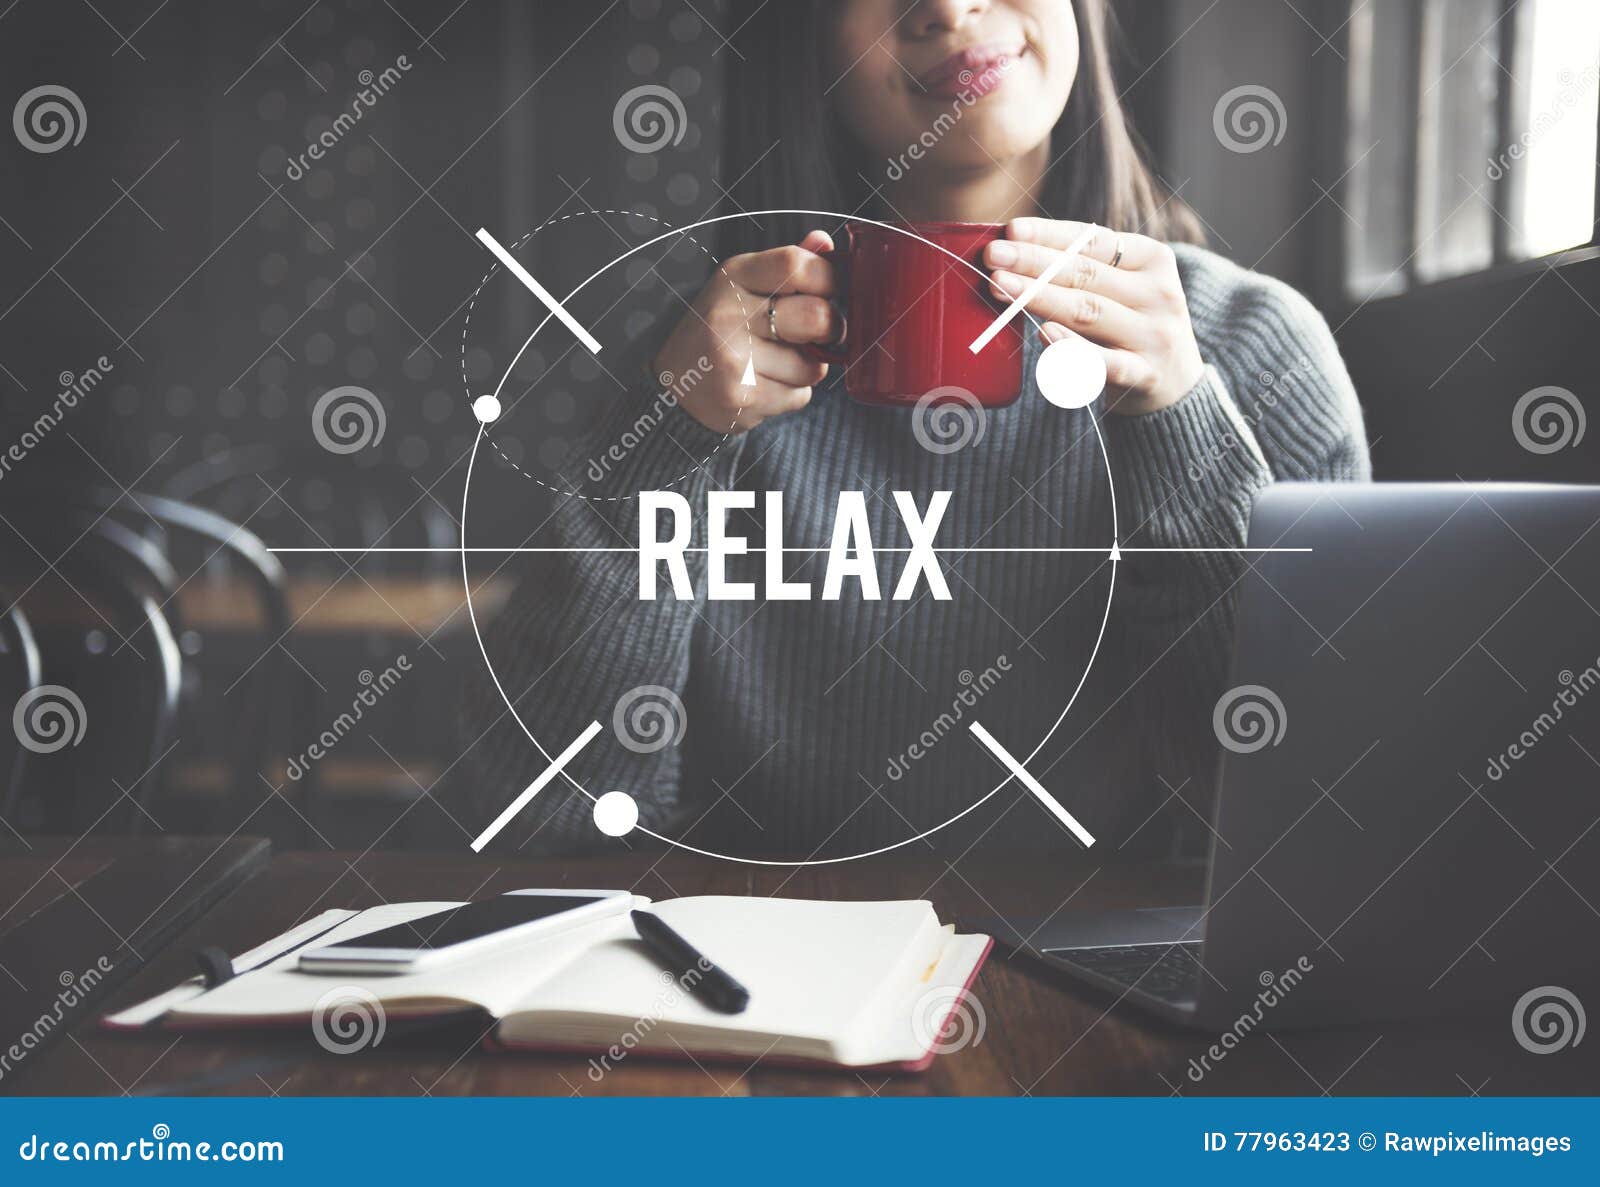 relaxation relax chill out peace resting serenity concept